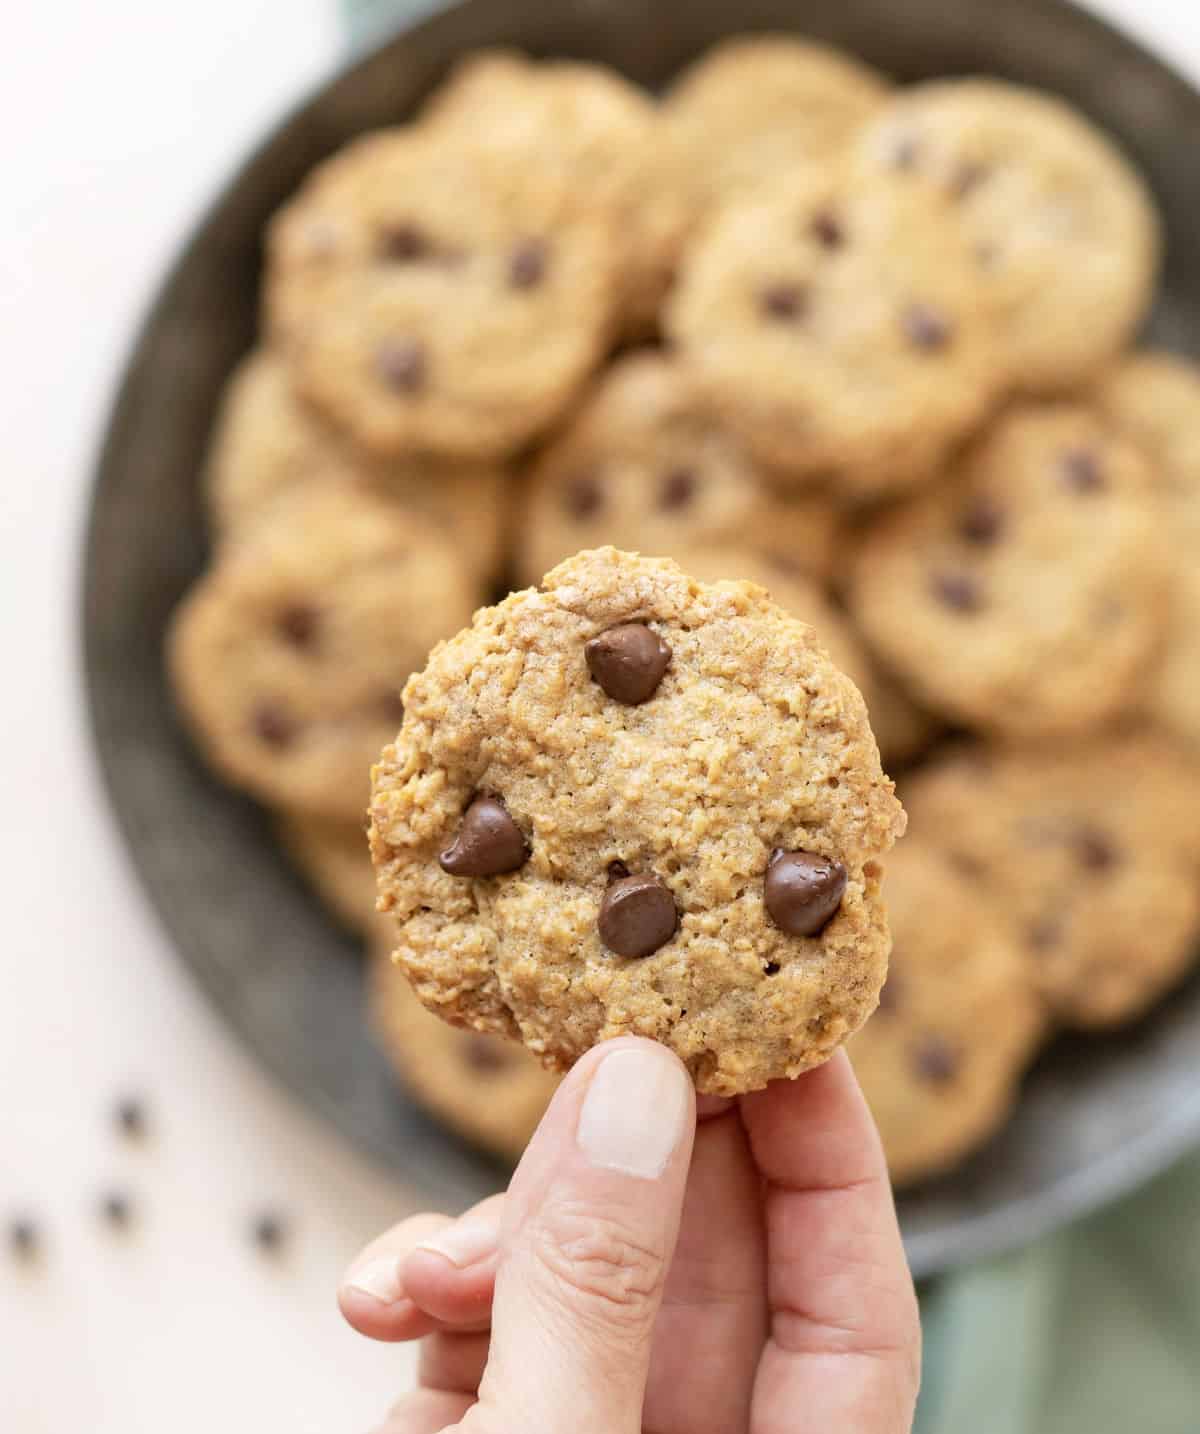 Hand holding chocolate chip oatmeal cookie over tin plate with pile of more cookies.